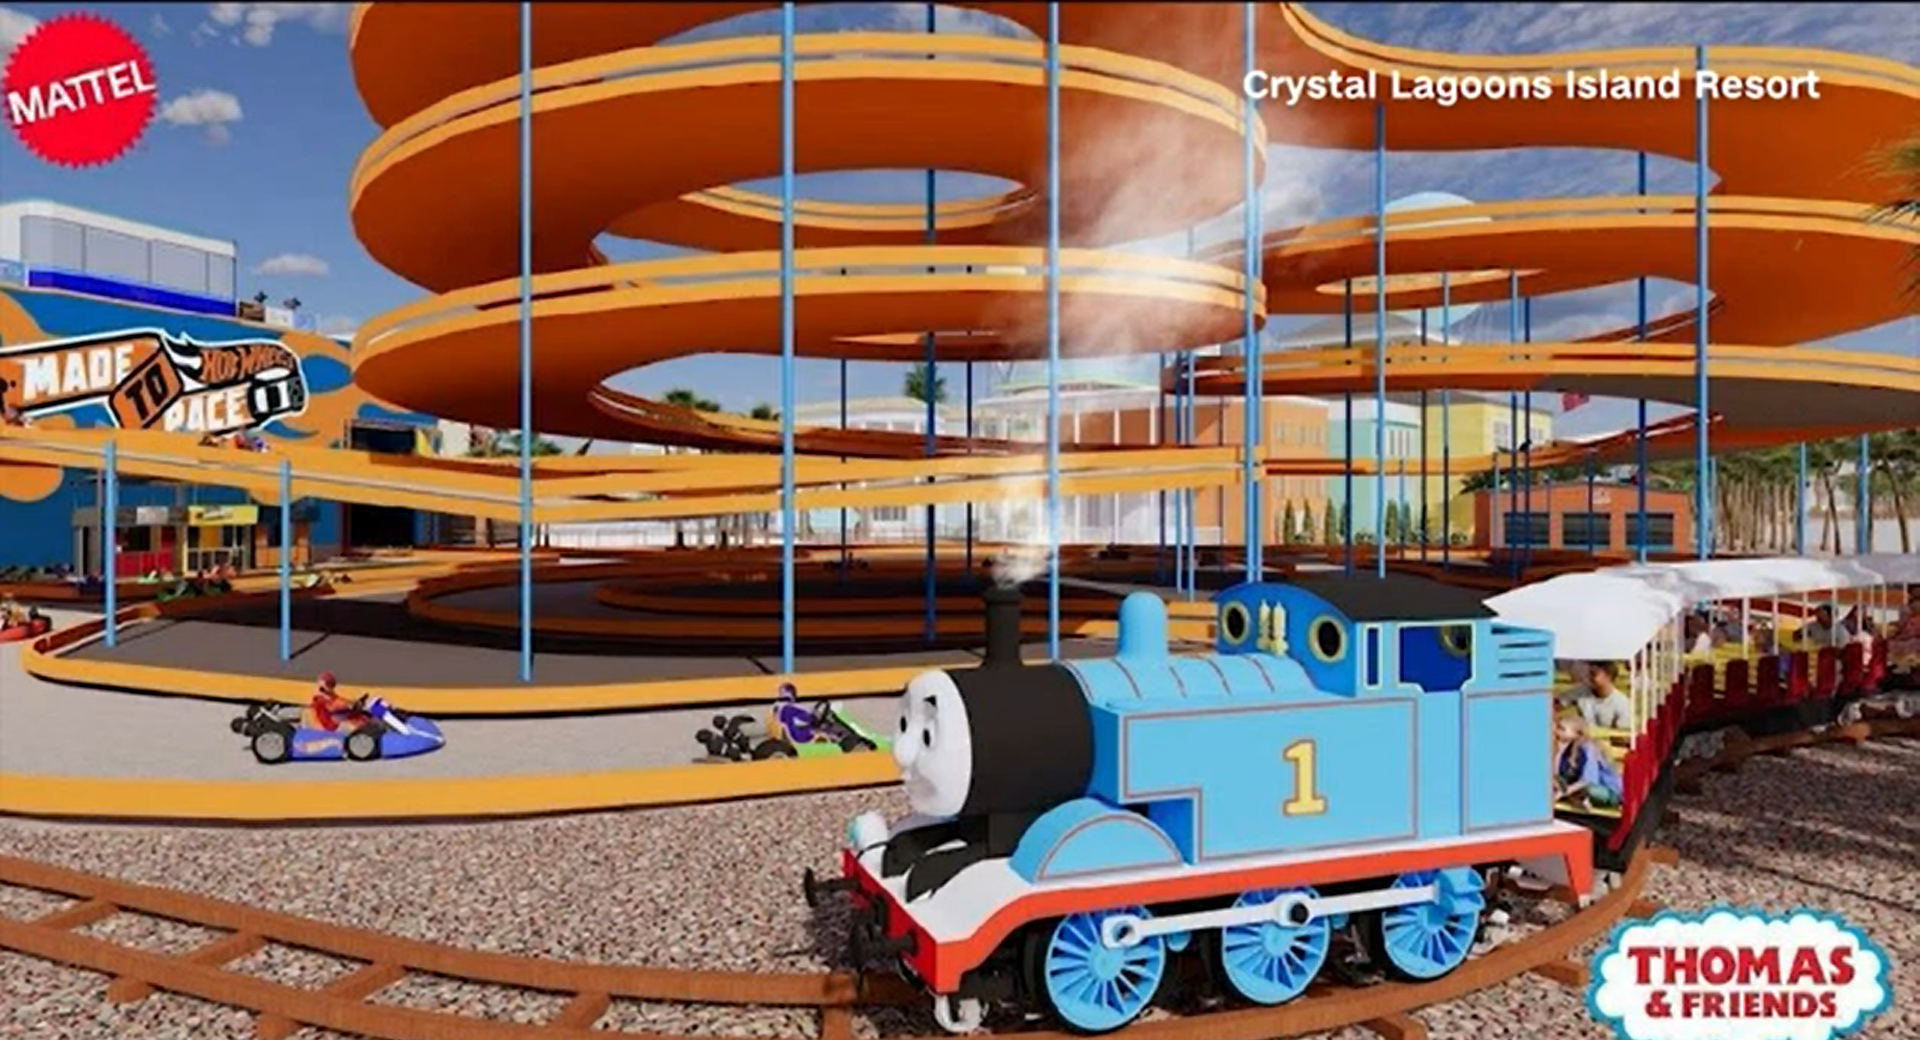 Everything We Know About the New Mattel Adventure Park - Inside the Magic